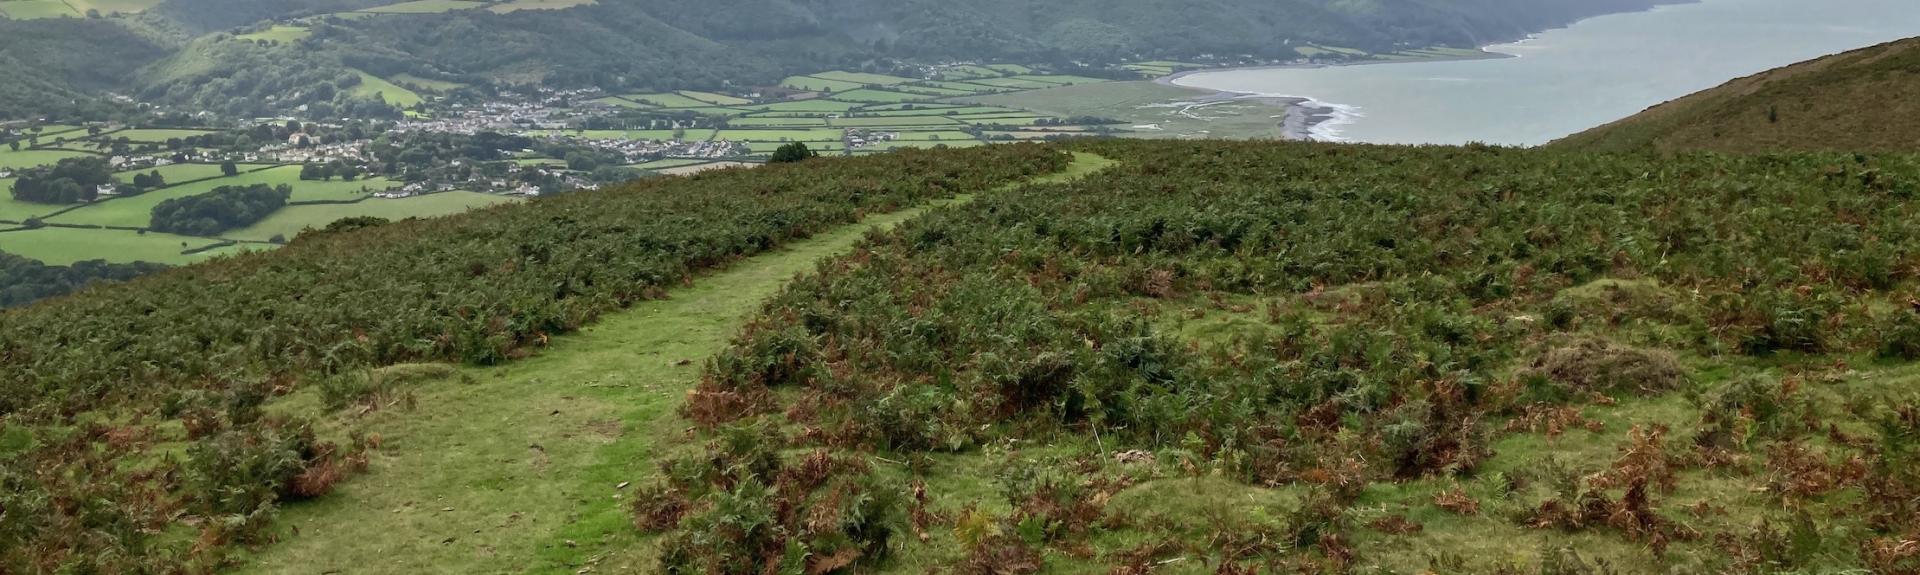 A view of Porlock Bay from a hill-top moorland location on Exmoor.